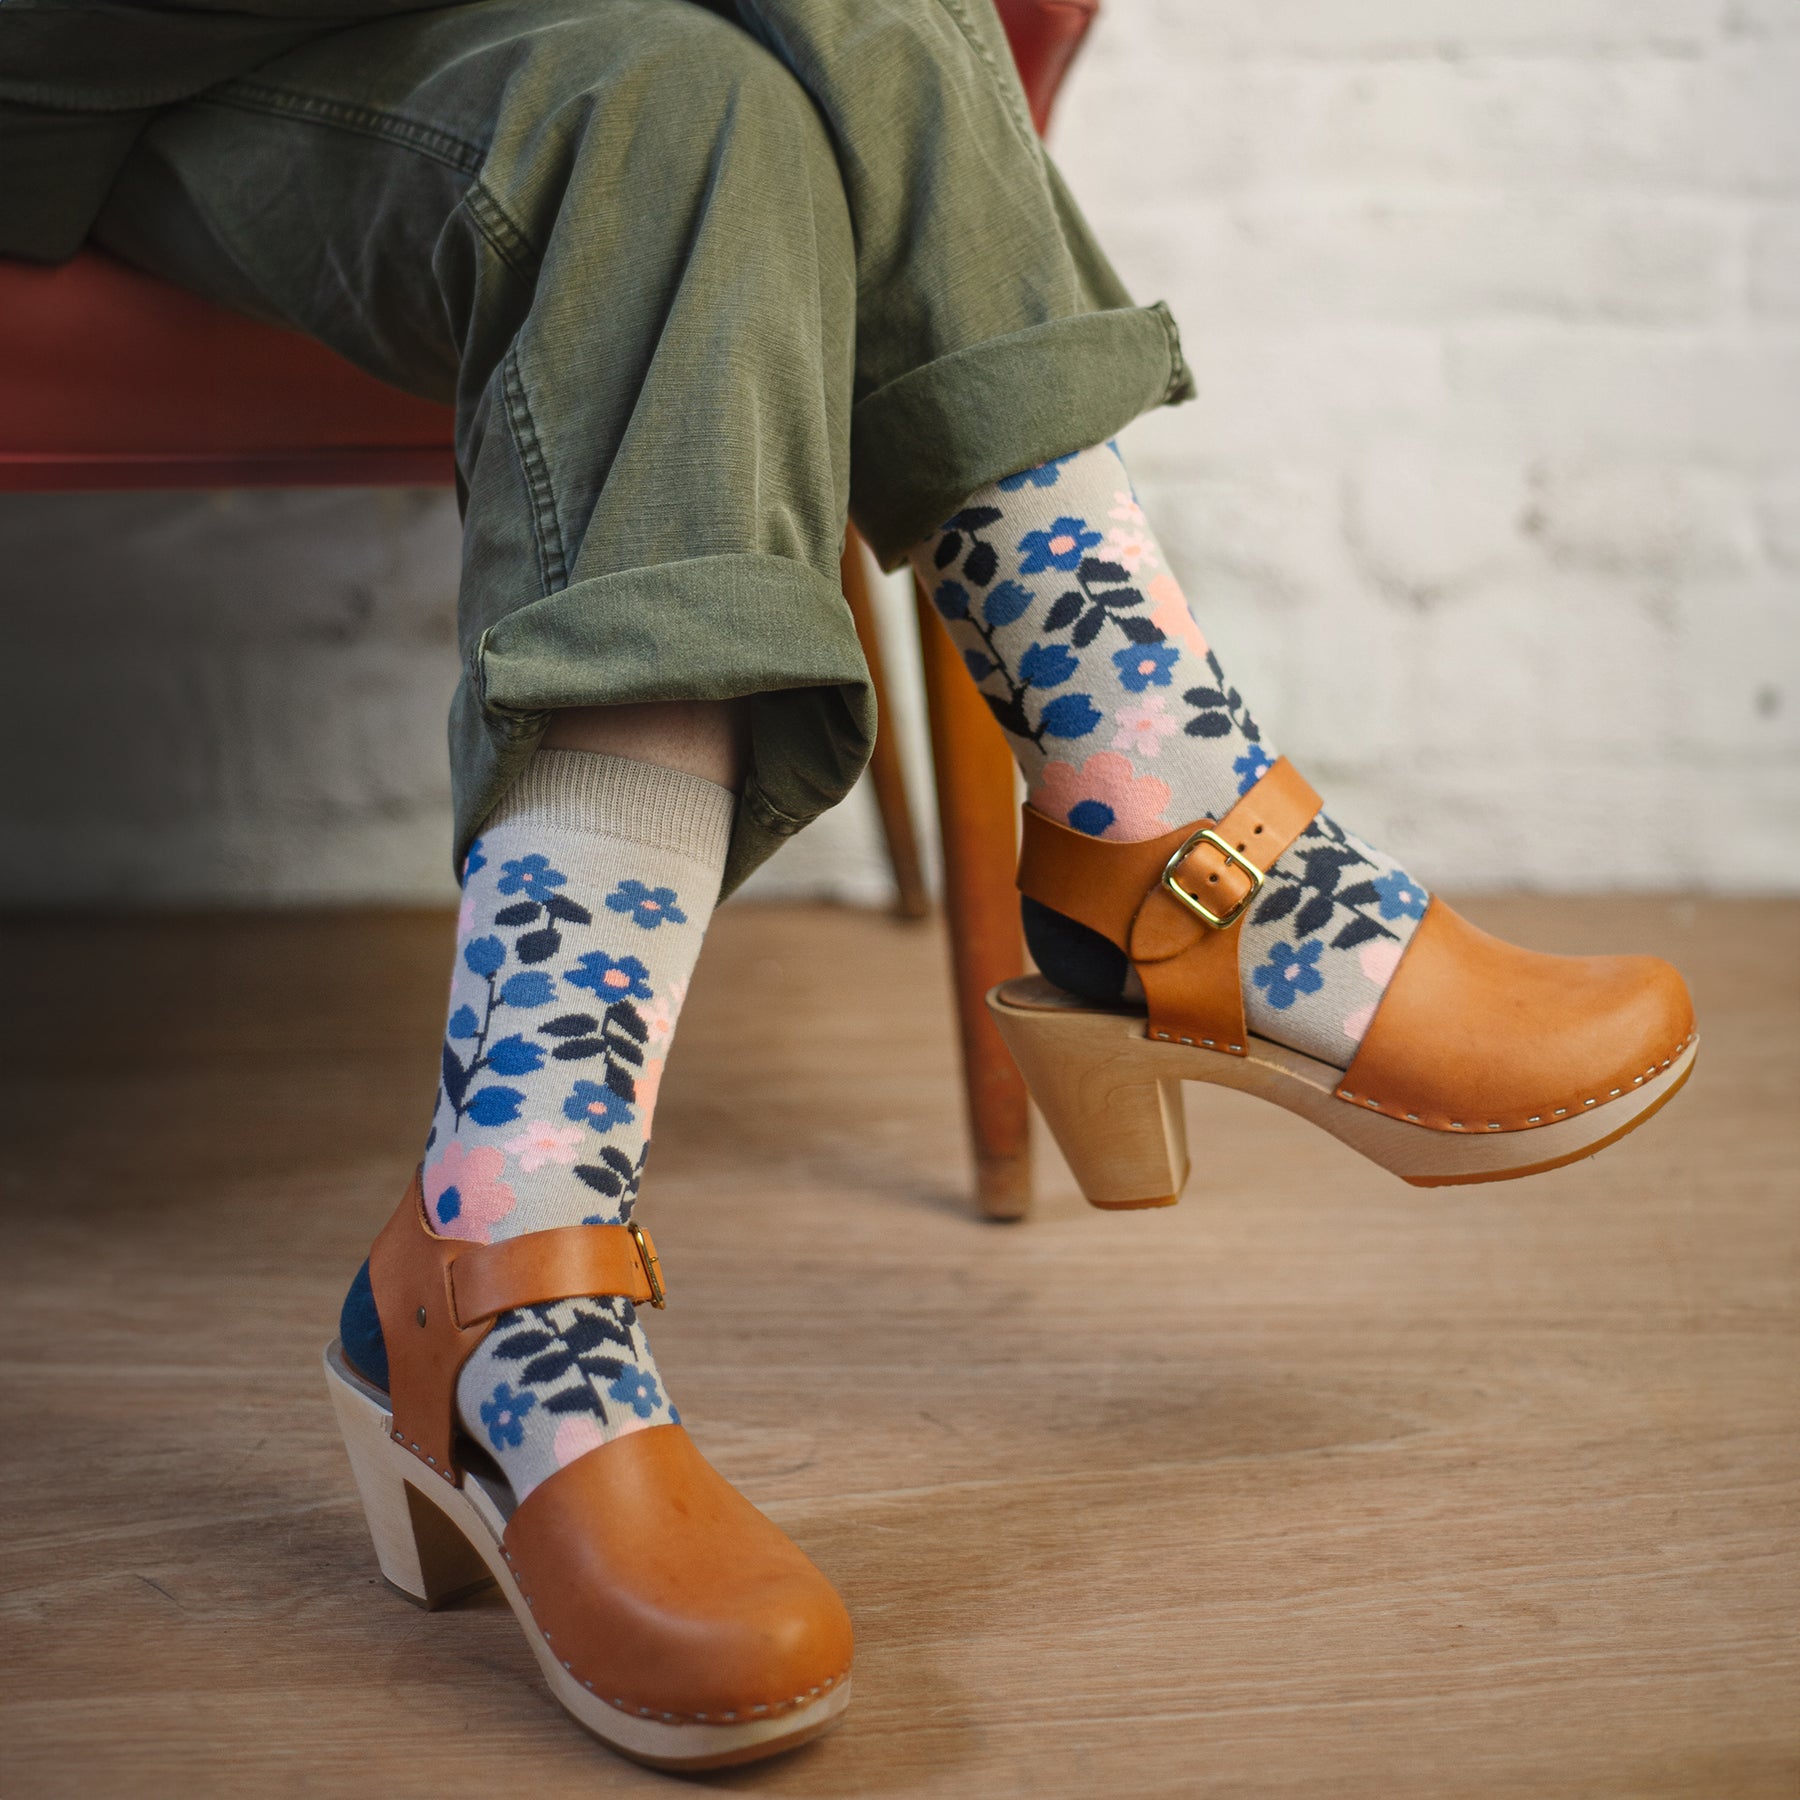 woman wearing floral patterned organic cotton socks with cuffed pants and brown clogs